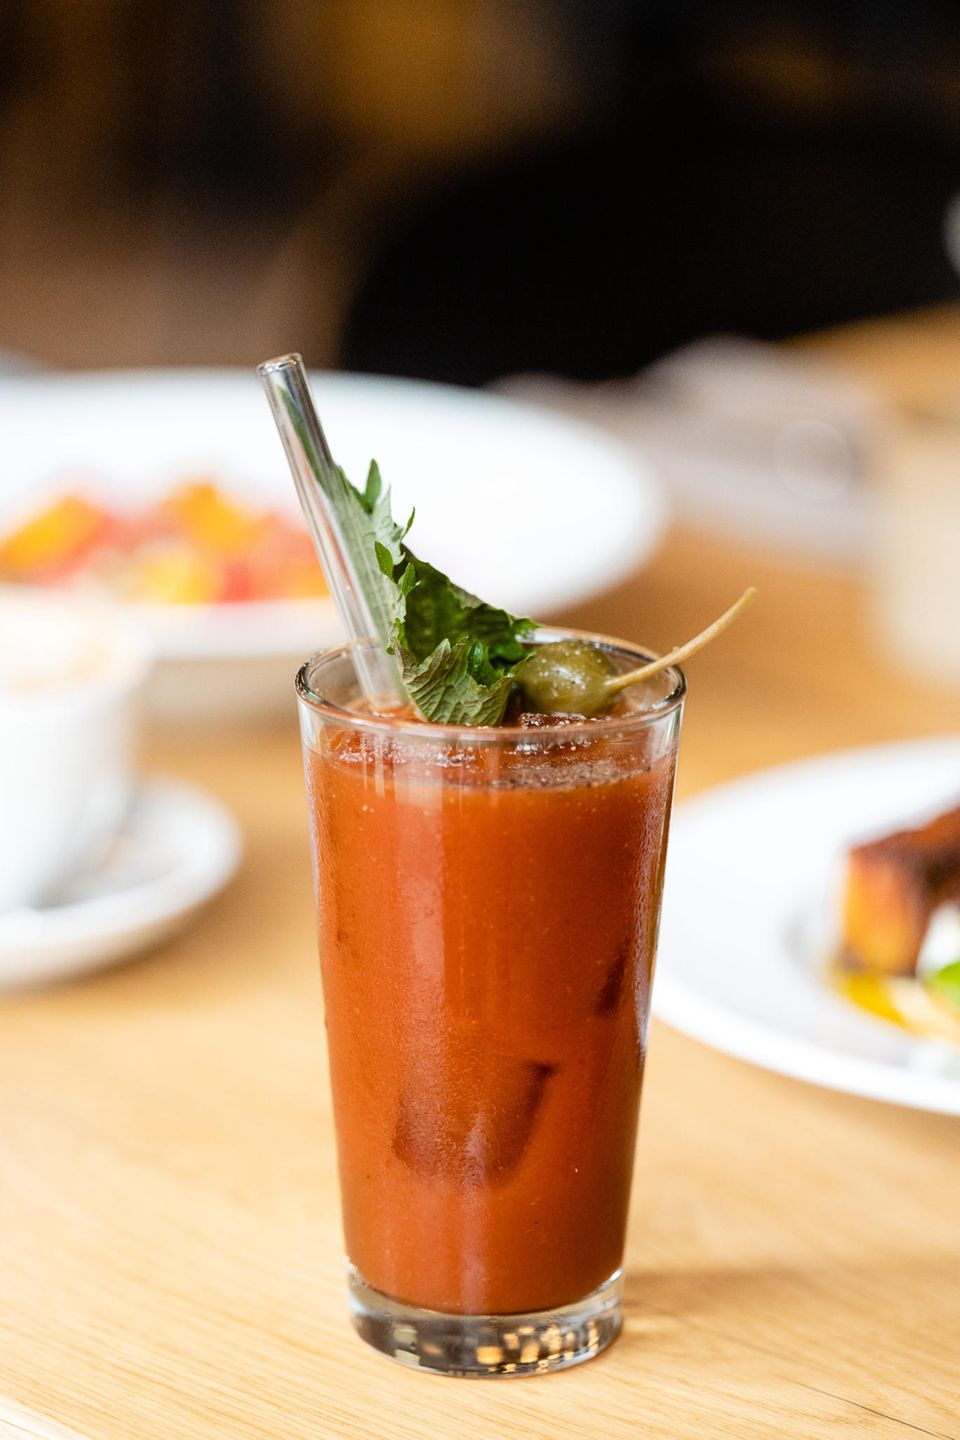 Bloody Mary for breakfast serves this "Breakfast 3000"